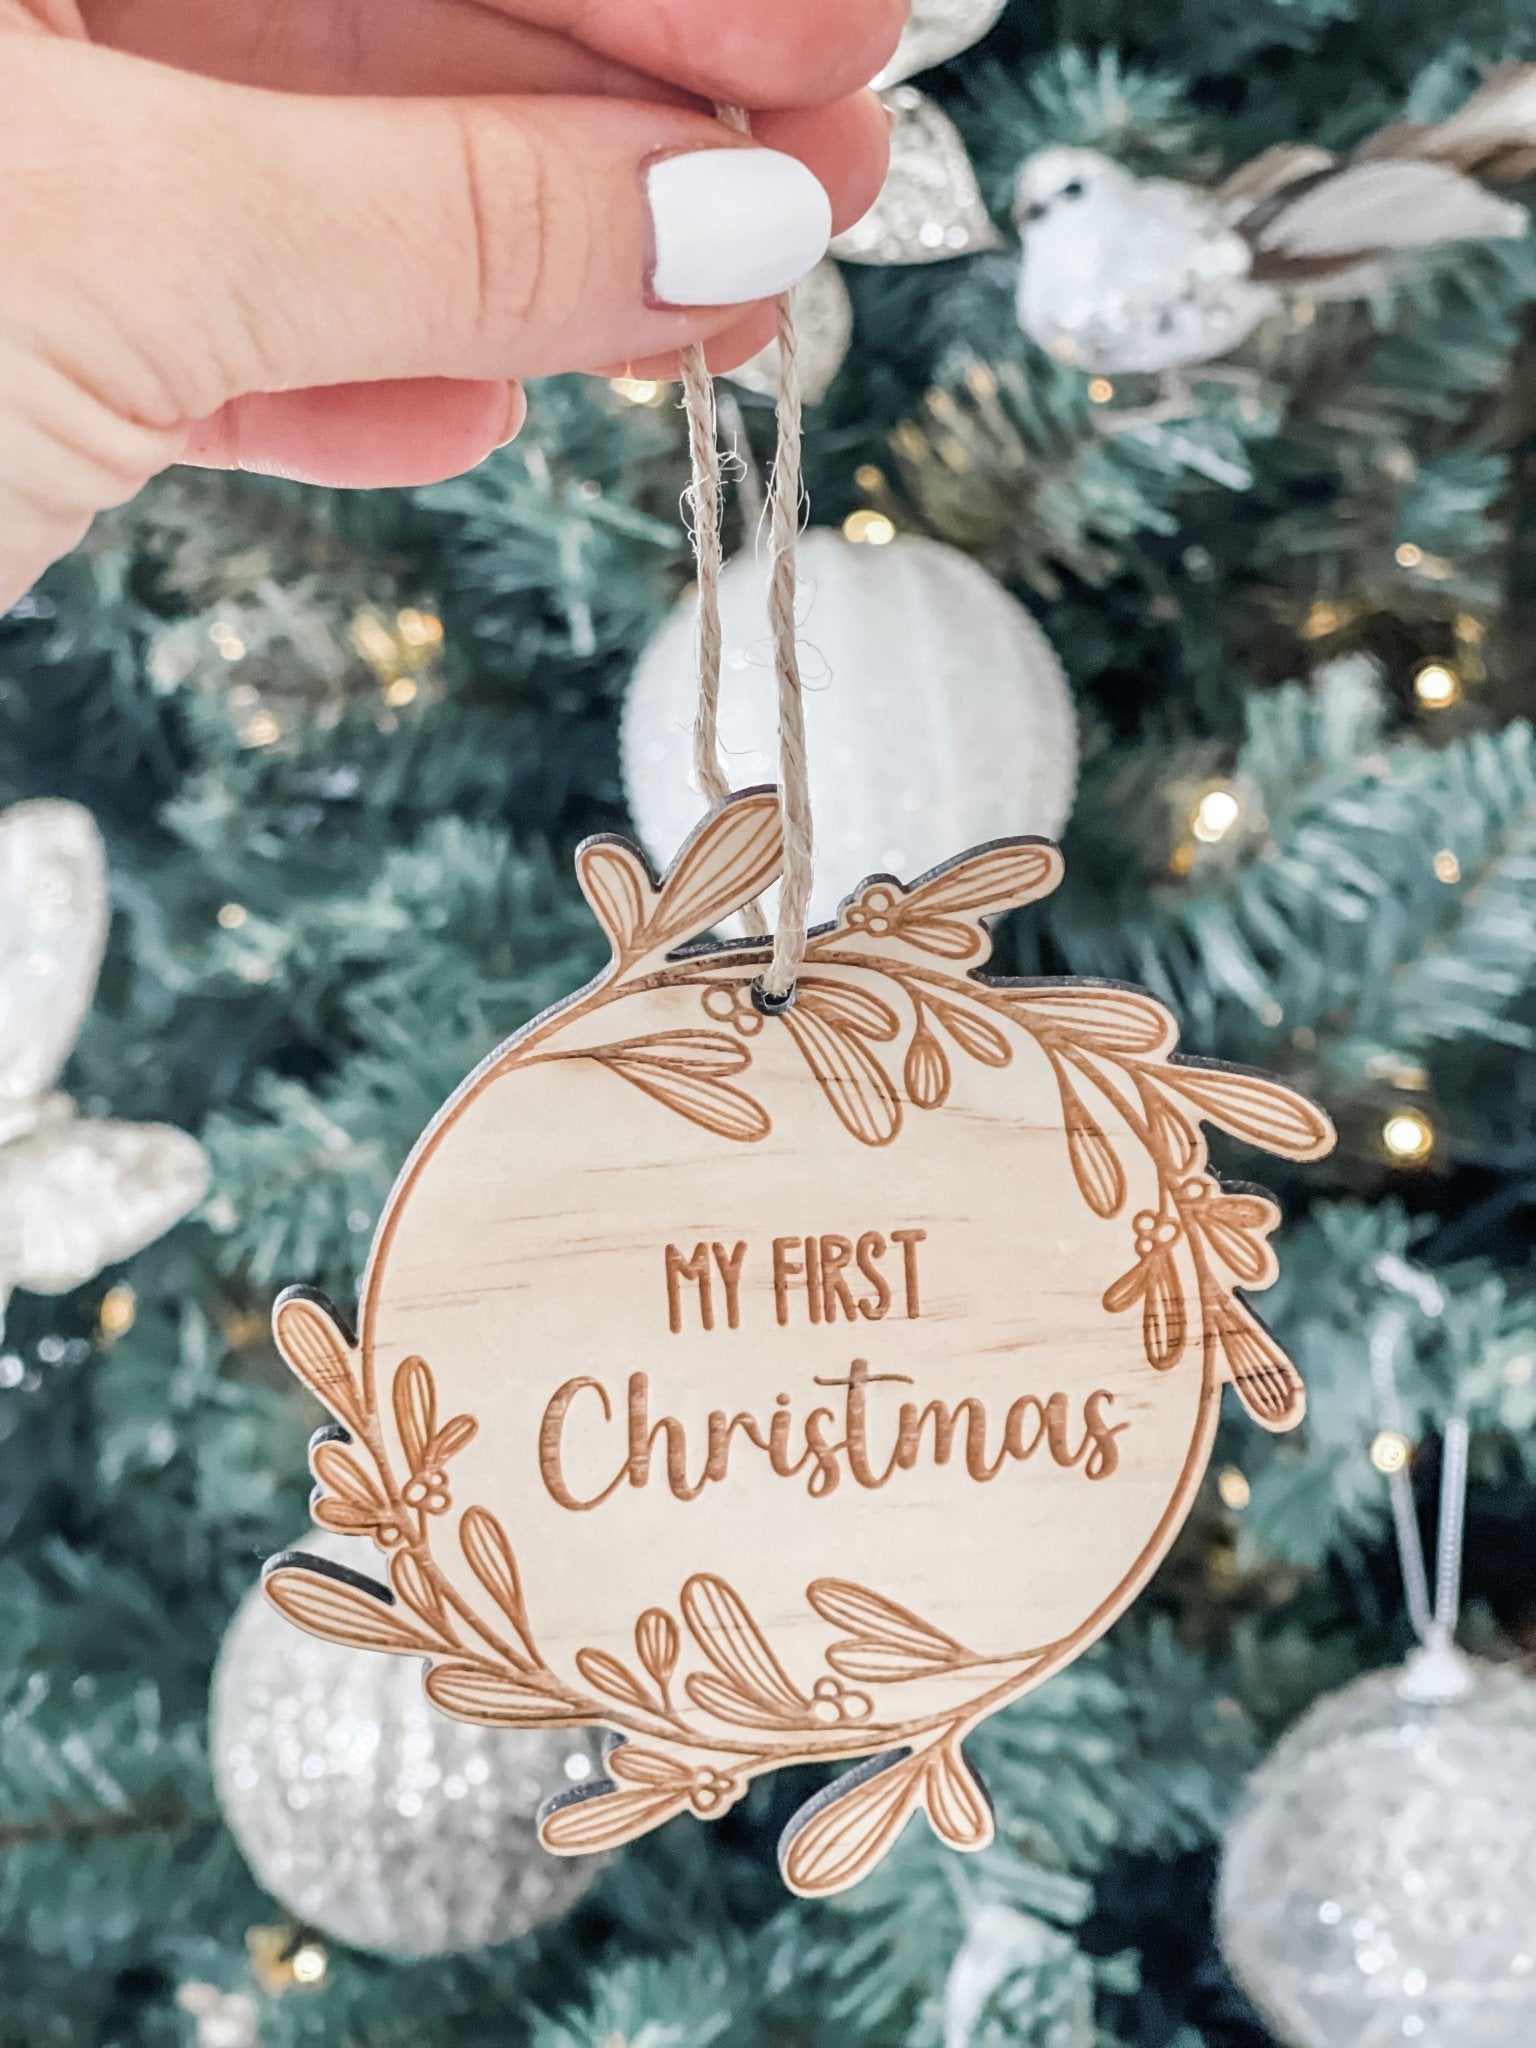 My First Christmas Ornament - The Humble Gift Co.